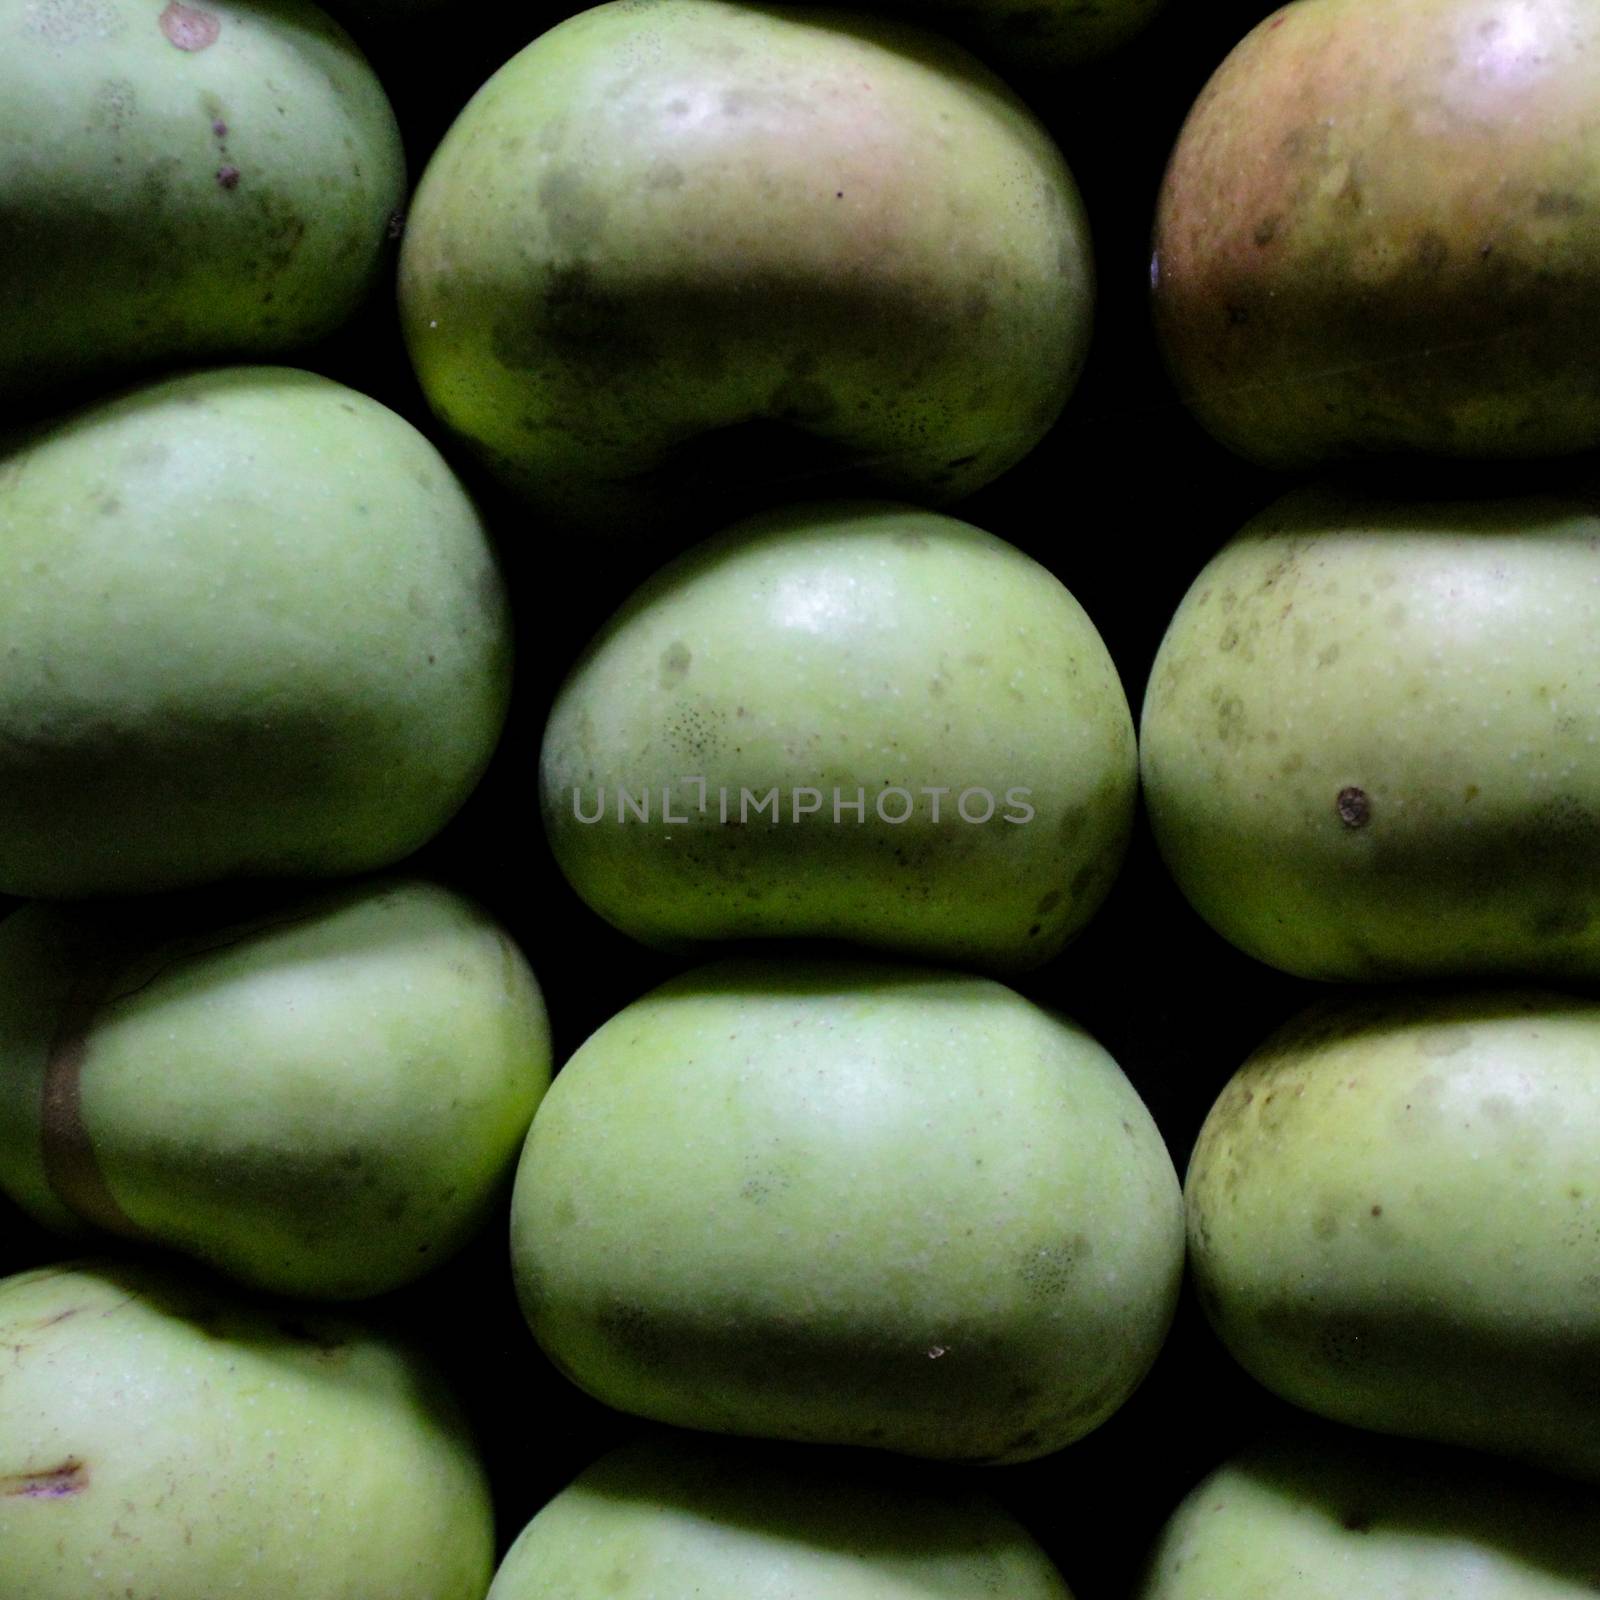 Homemade apples of different sizes perfectly stacked in a crate. Apples in a crate in a storeroom in a dark room to keep them lasting longer. Variety Kanicka. Zavidovici, Bosnia and Herzegovina.